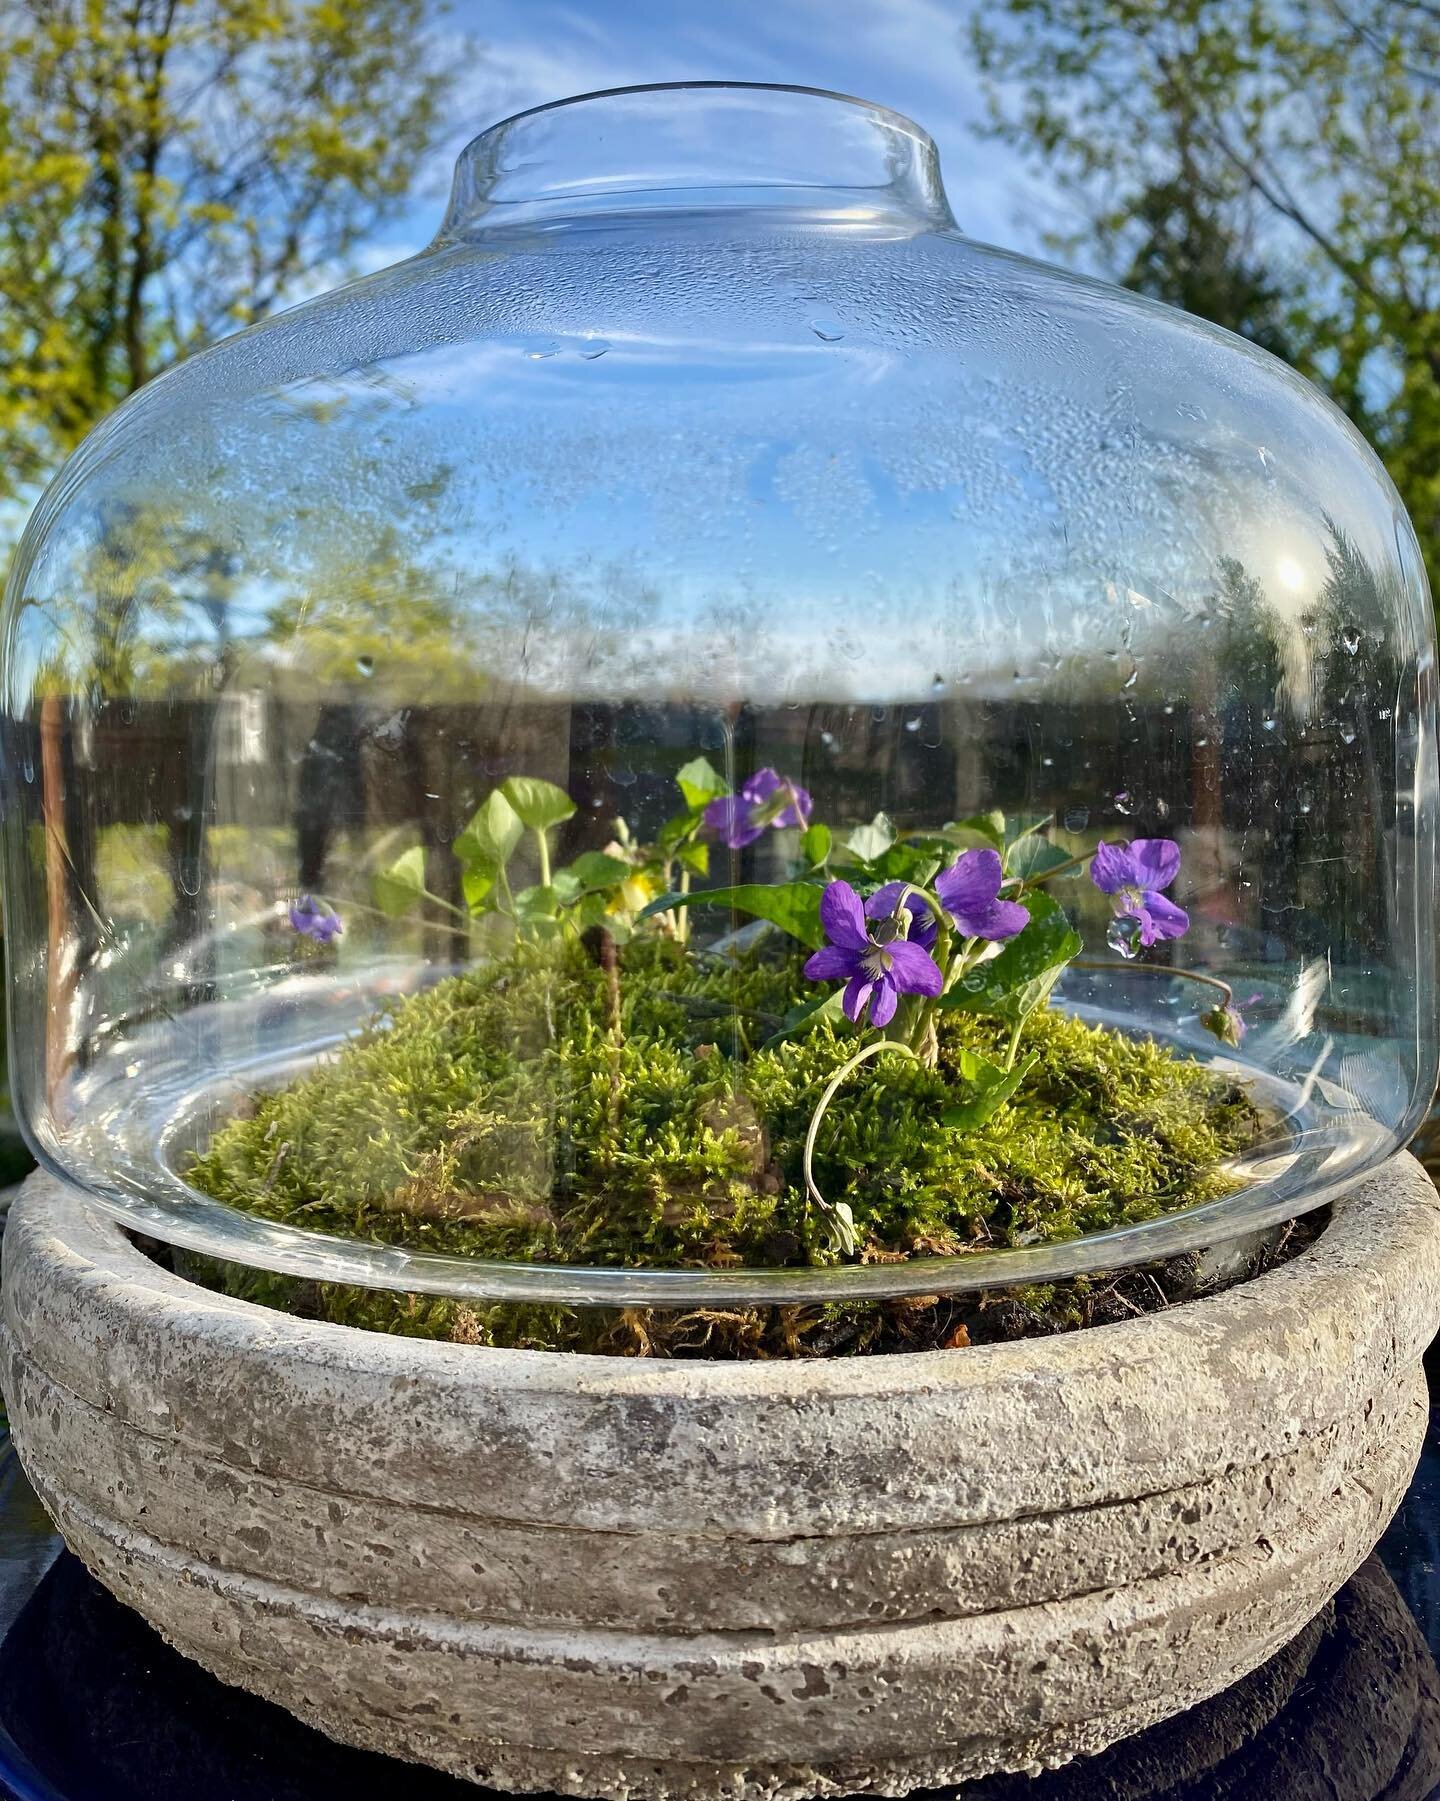 Since I just installed an new abstract painting show yesterday (more info on that coming next week), I&rsquo;m feeling free to share my other recently creative efforts (non-painting!).
&hellip;
#terrariumgardening #terrarium #wildviolets #mossgarden 